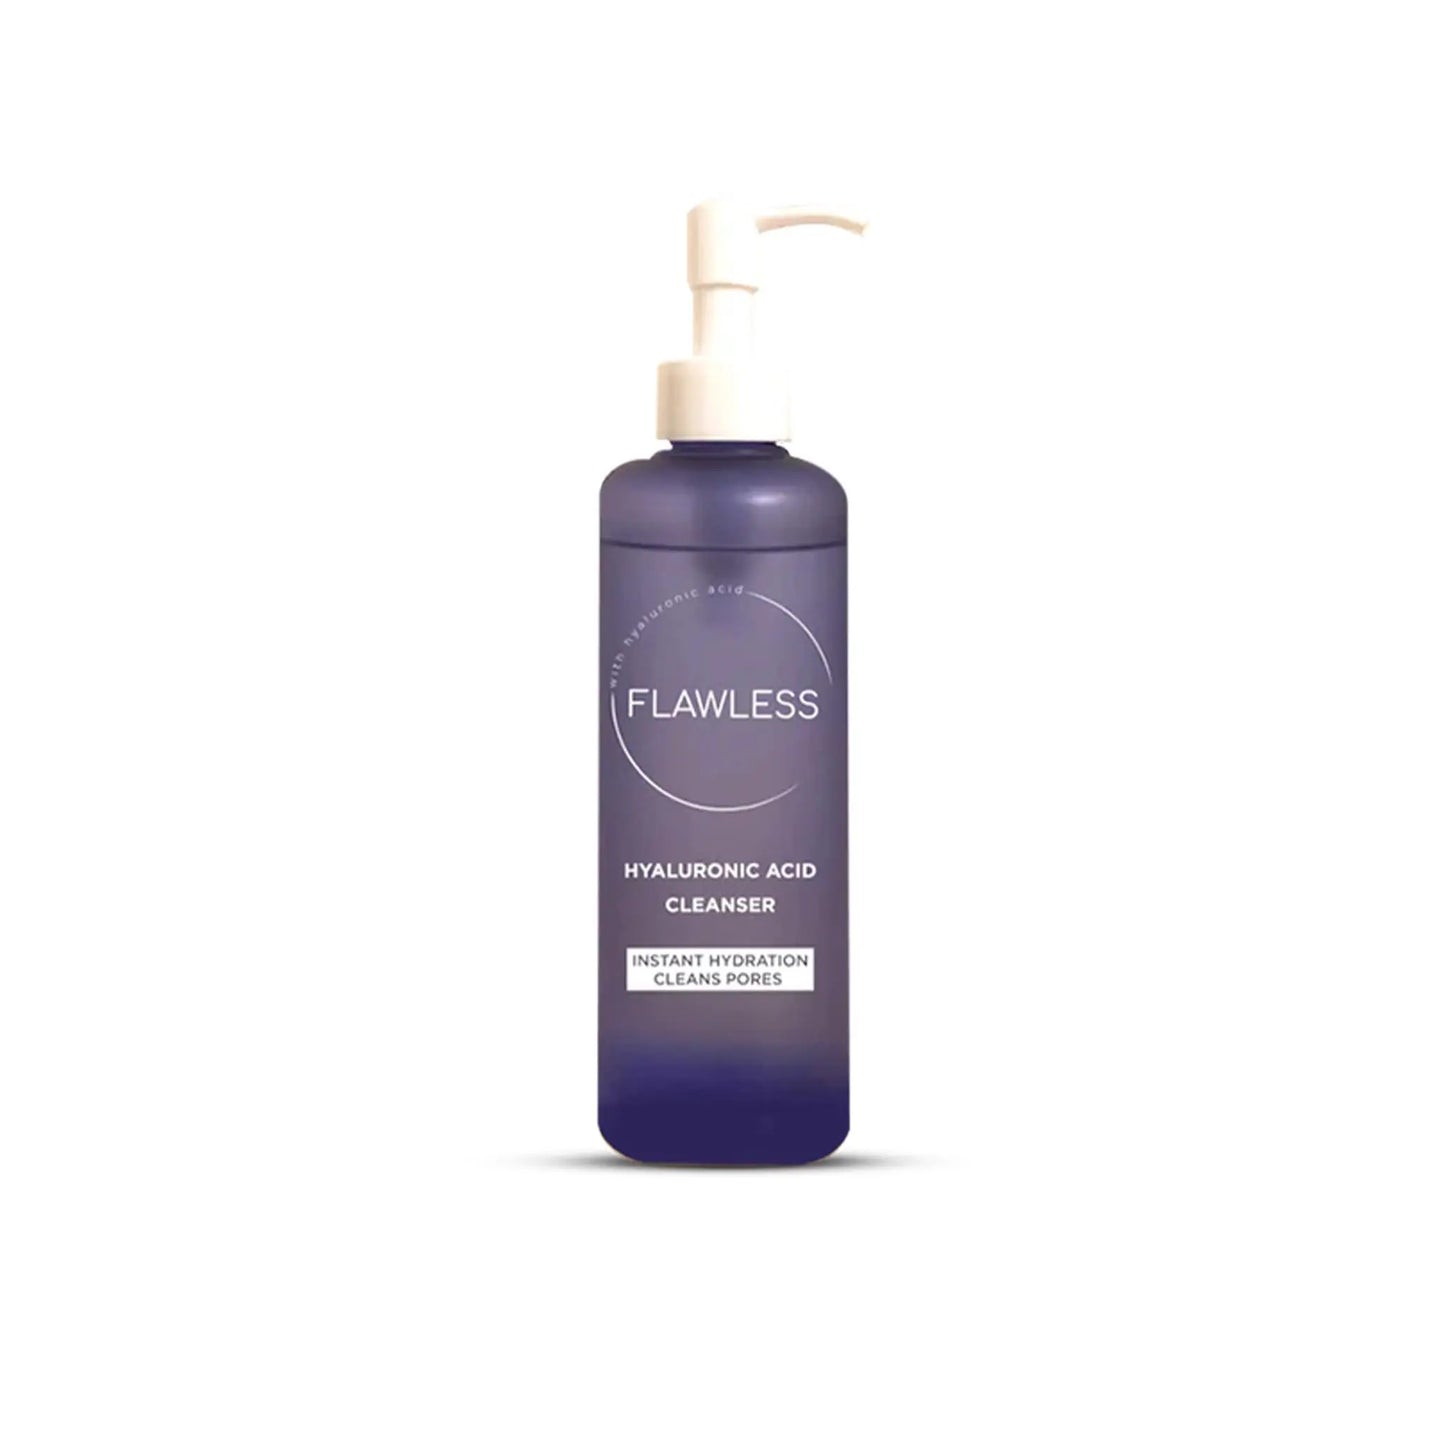 Flawless Hyaluronic acid facial cleanser Flawless